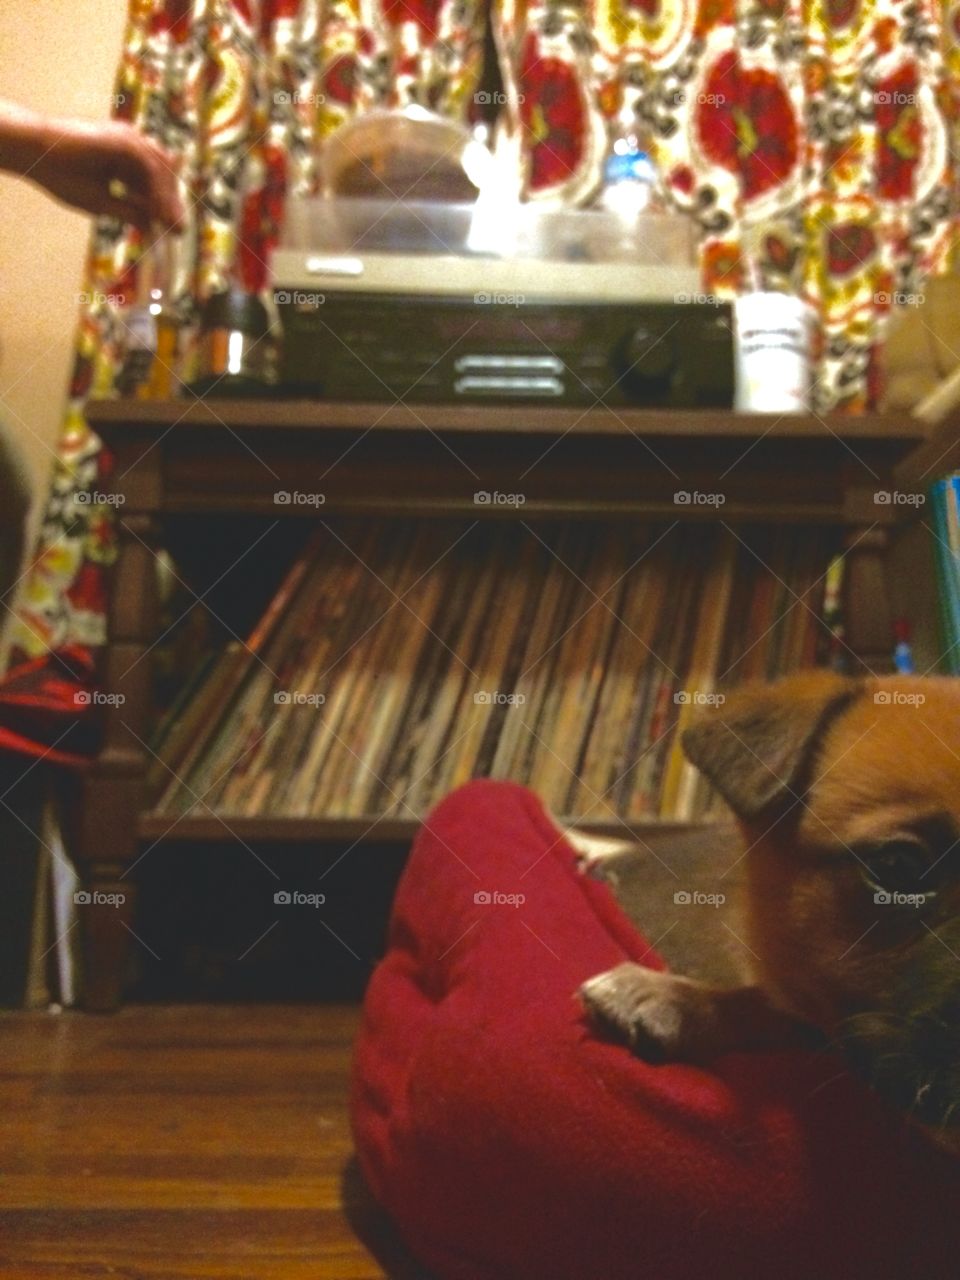 Teaching my pup at an early age that vinyl matters